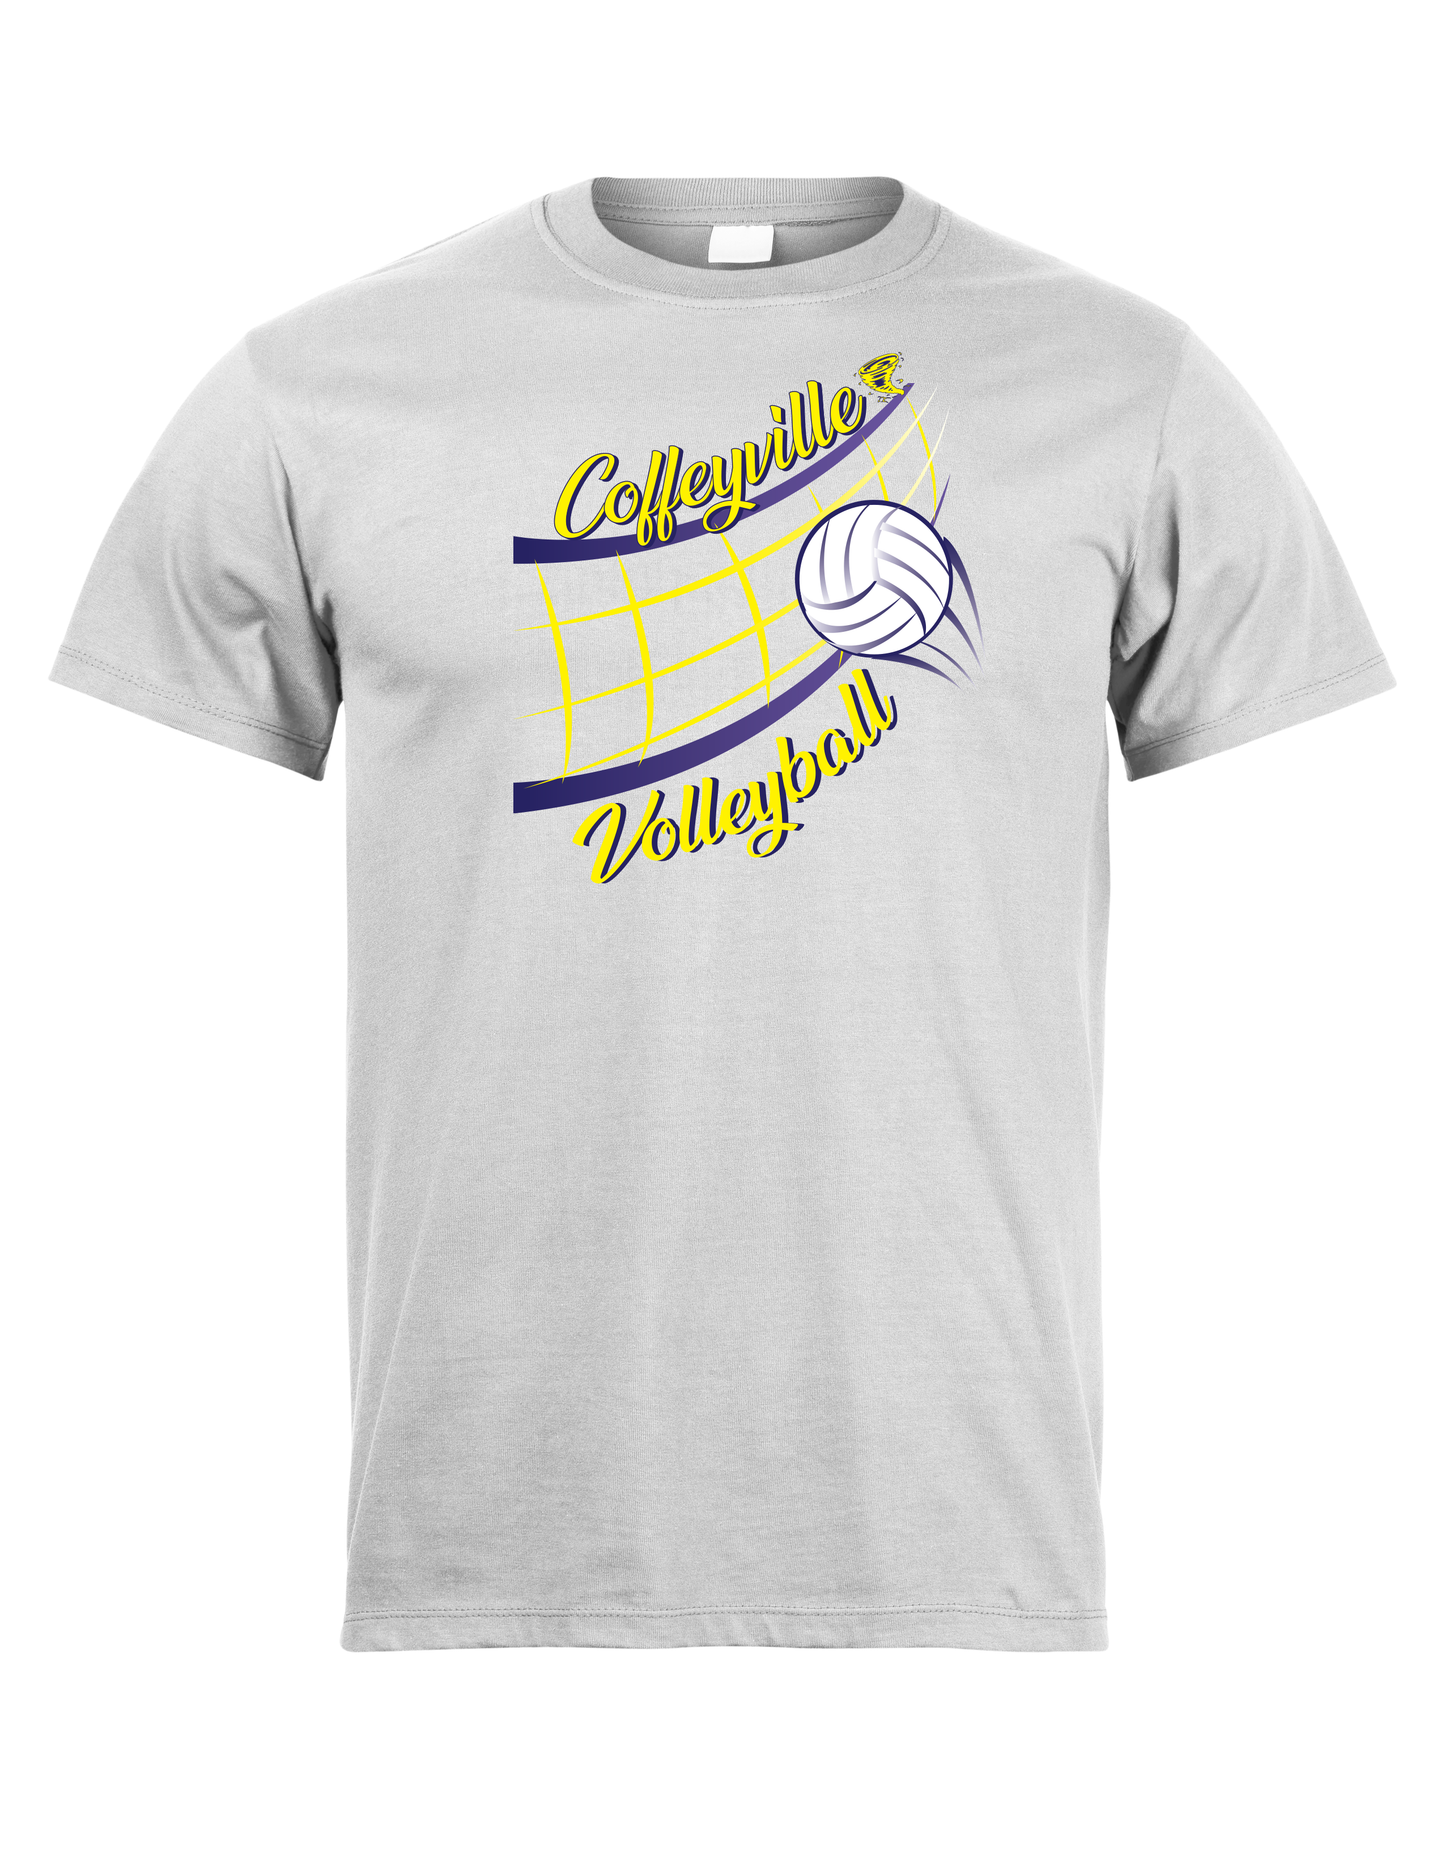 FKHS - Volleyball Adult & Youth Sizes